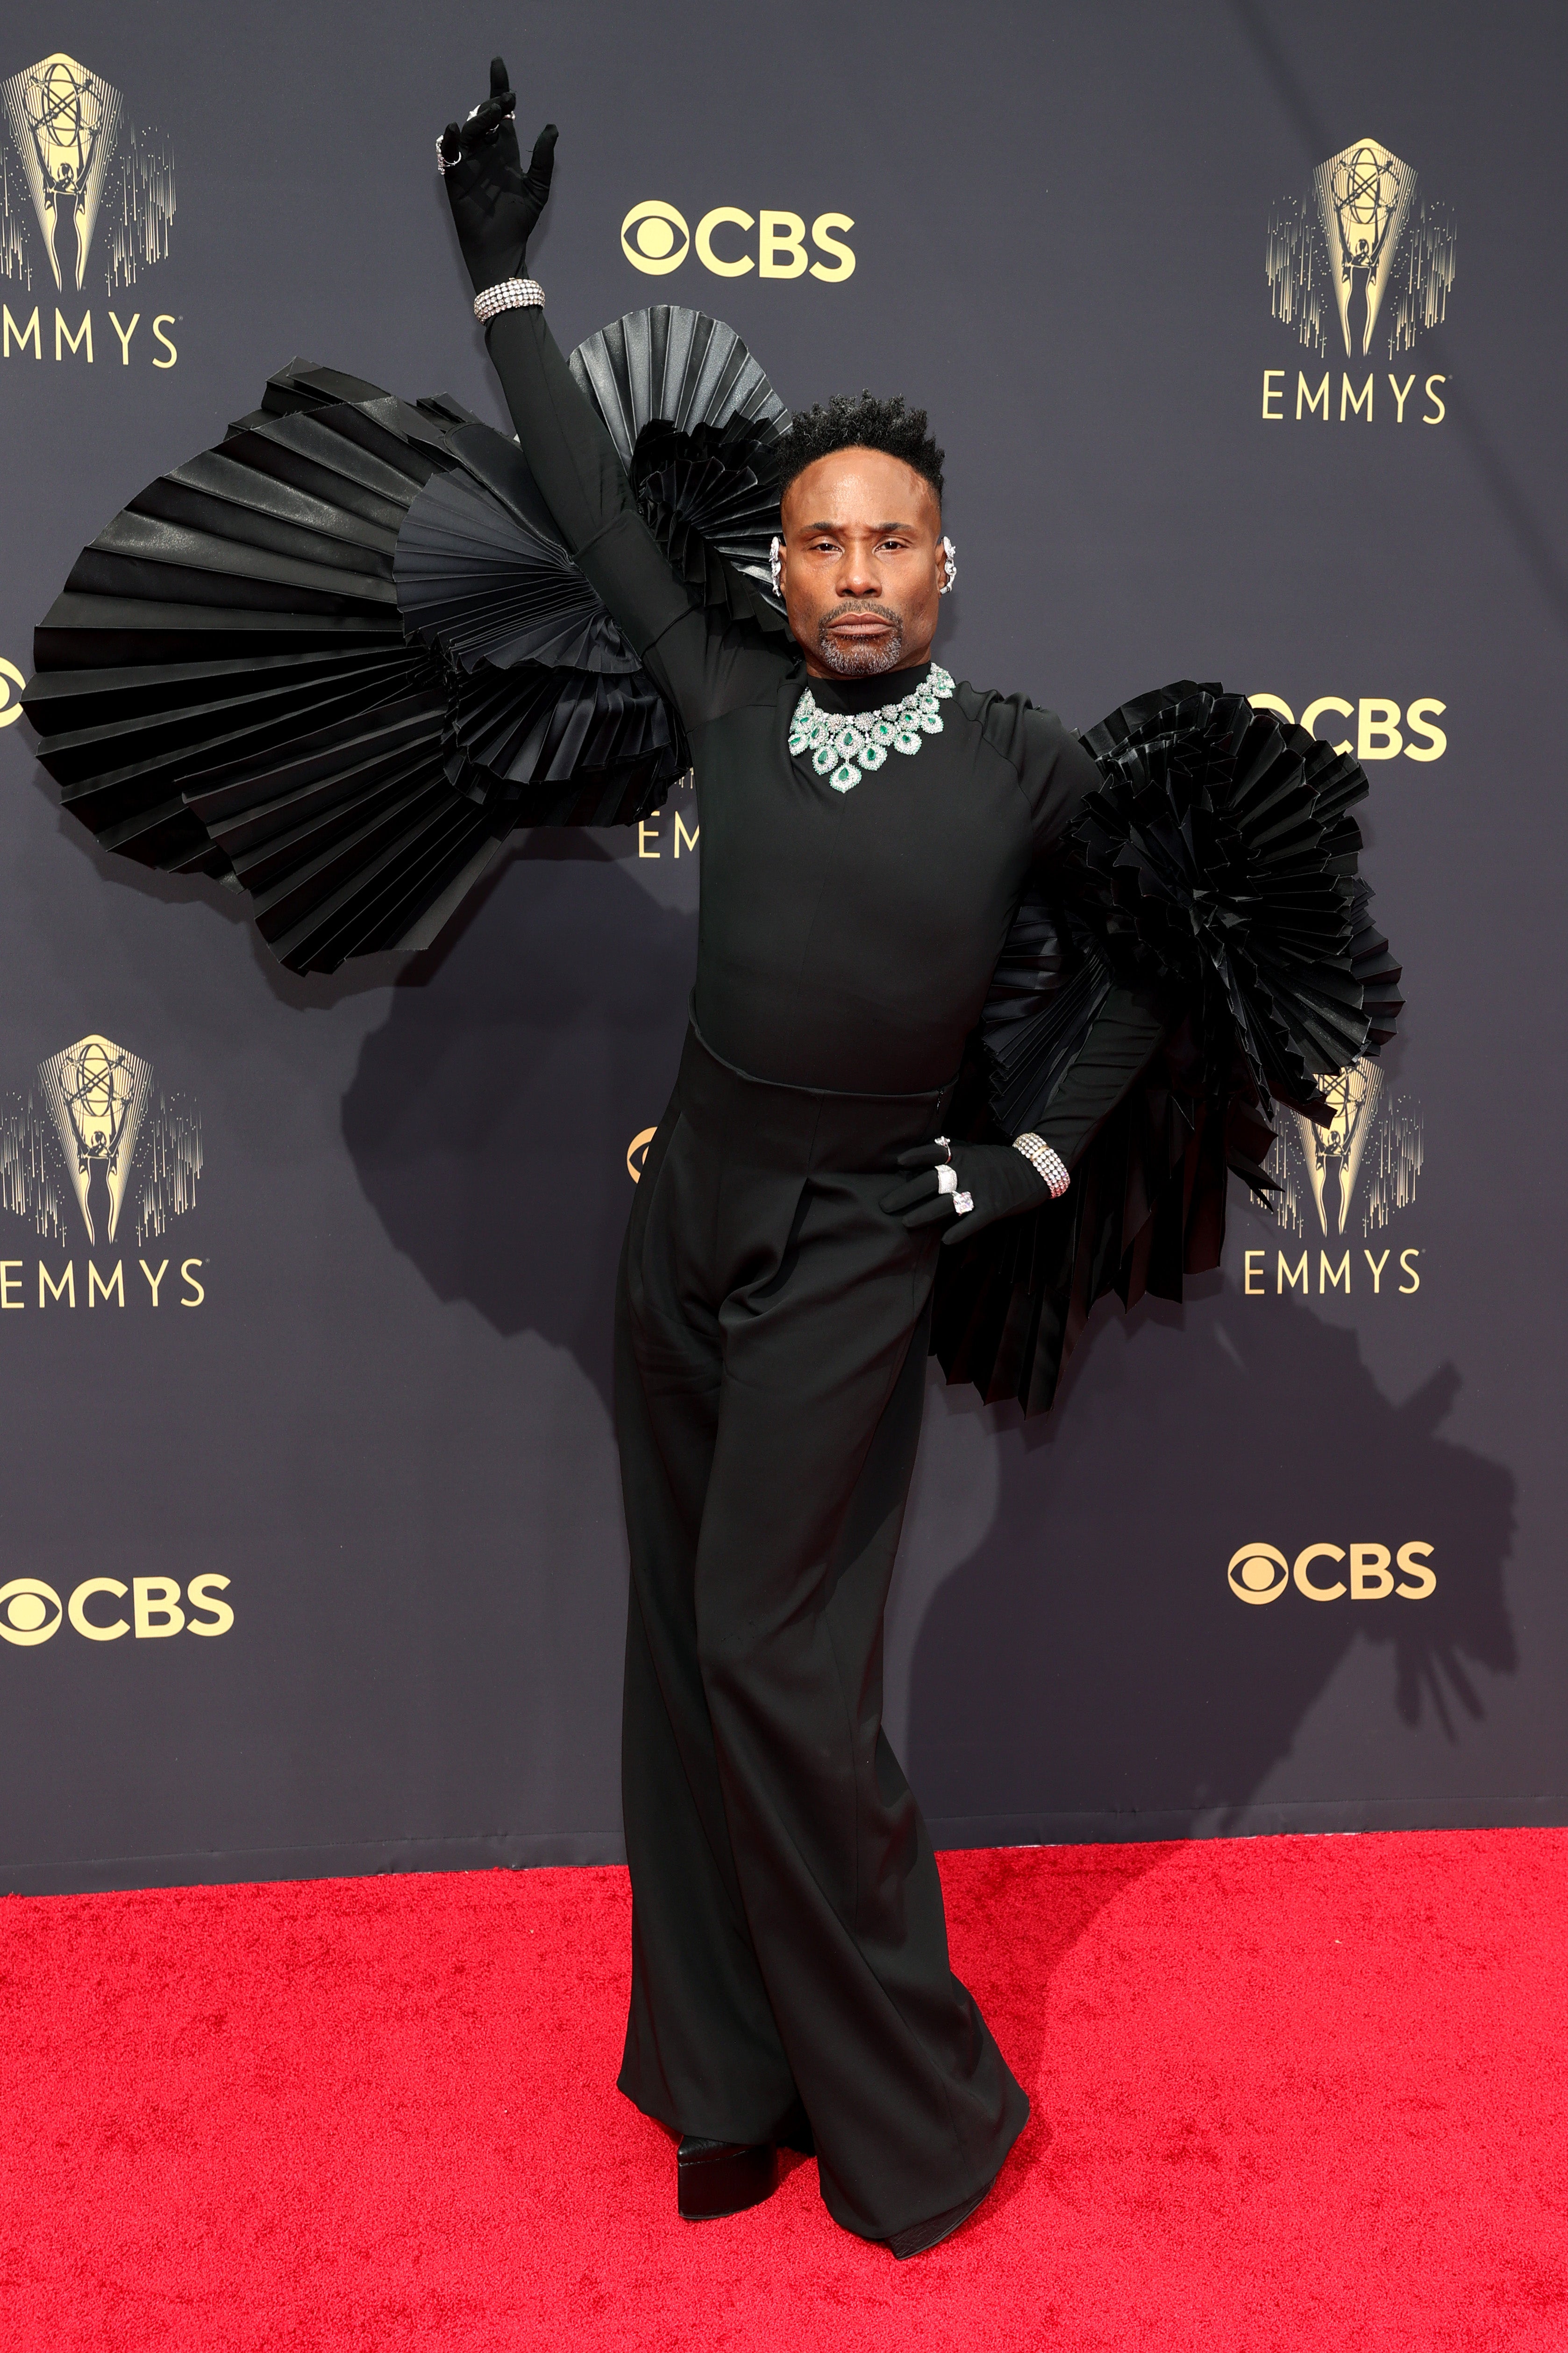 Billy Porter at the 73rd Emmy Awards